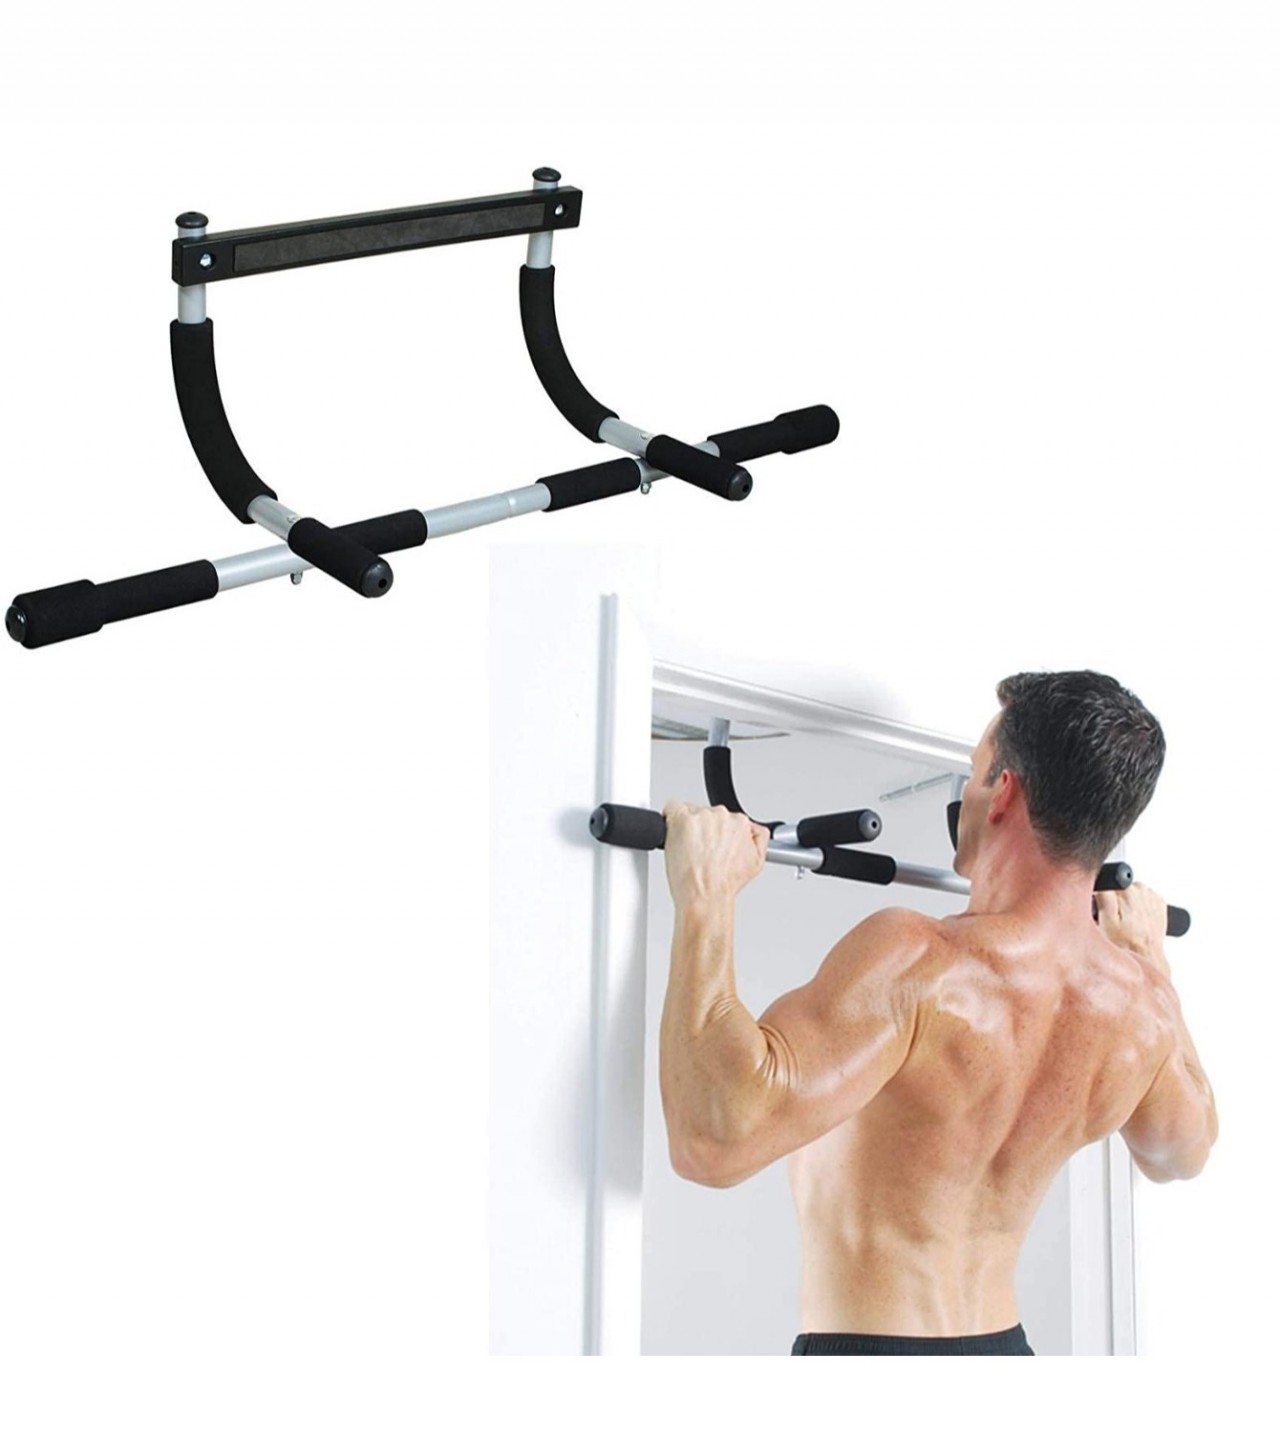 Iron Chinup Bar High Quality Imported Bar Multi Pull Up Bar Silver